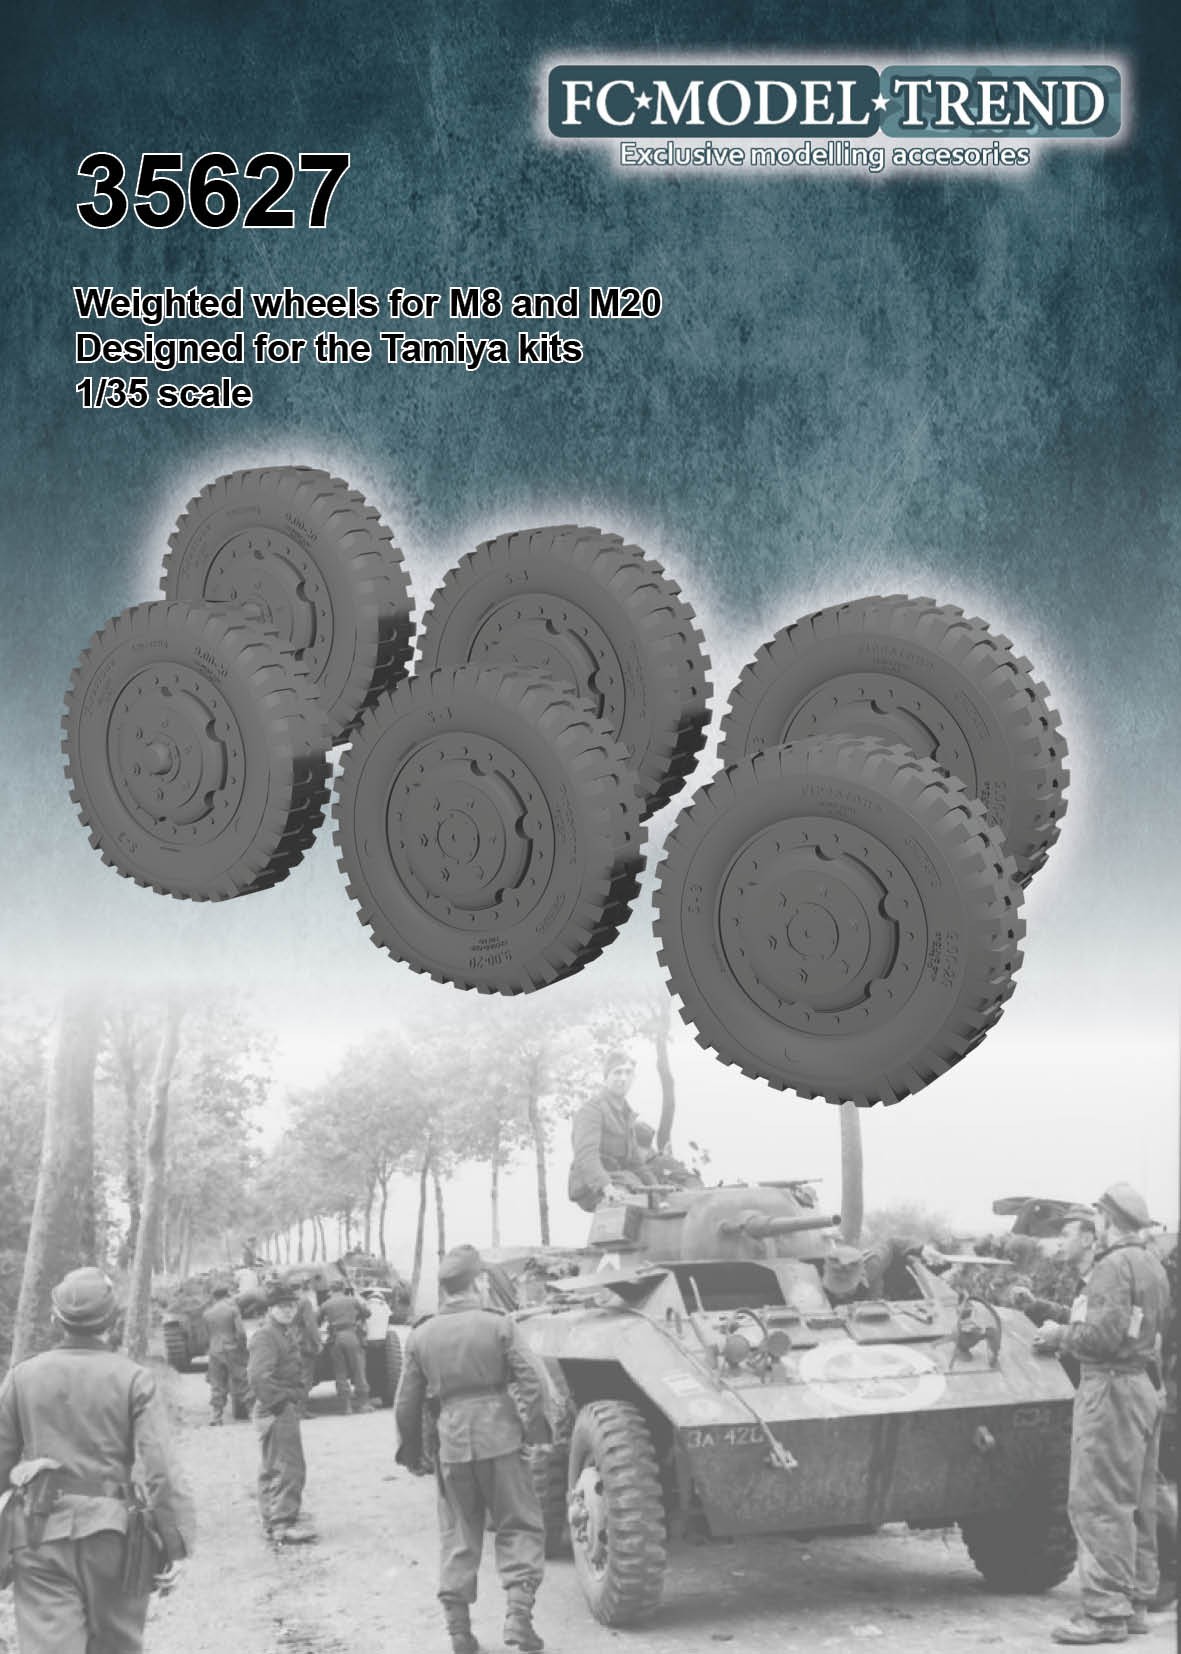 M8/M20 weighted wheels, resin cast 1/35 scale for the Tamiya kits